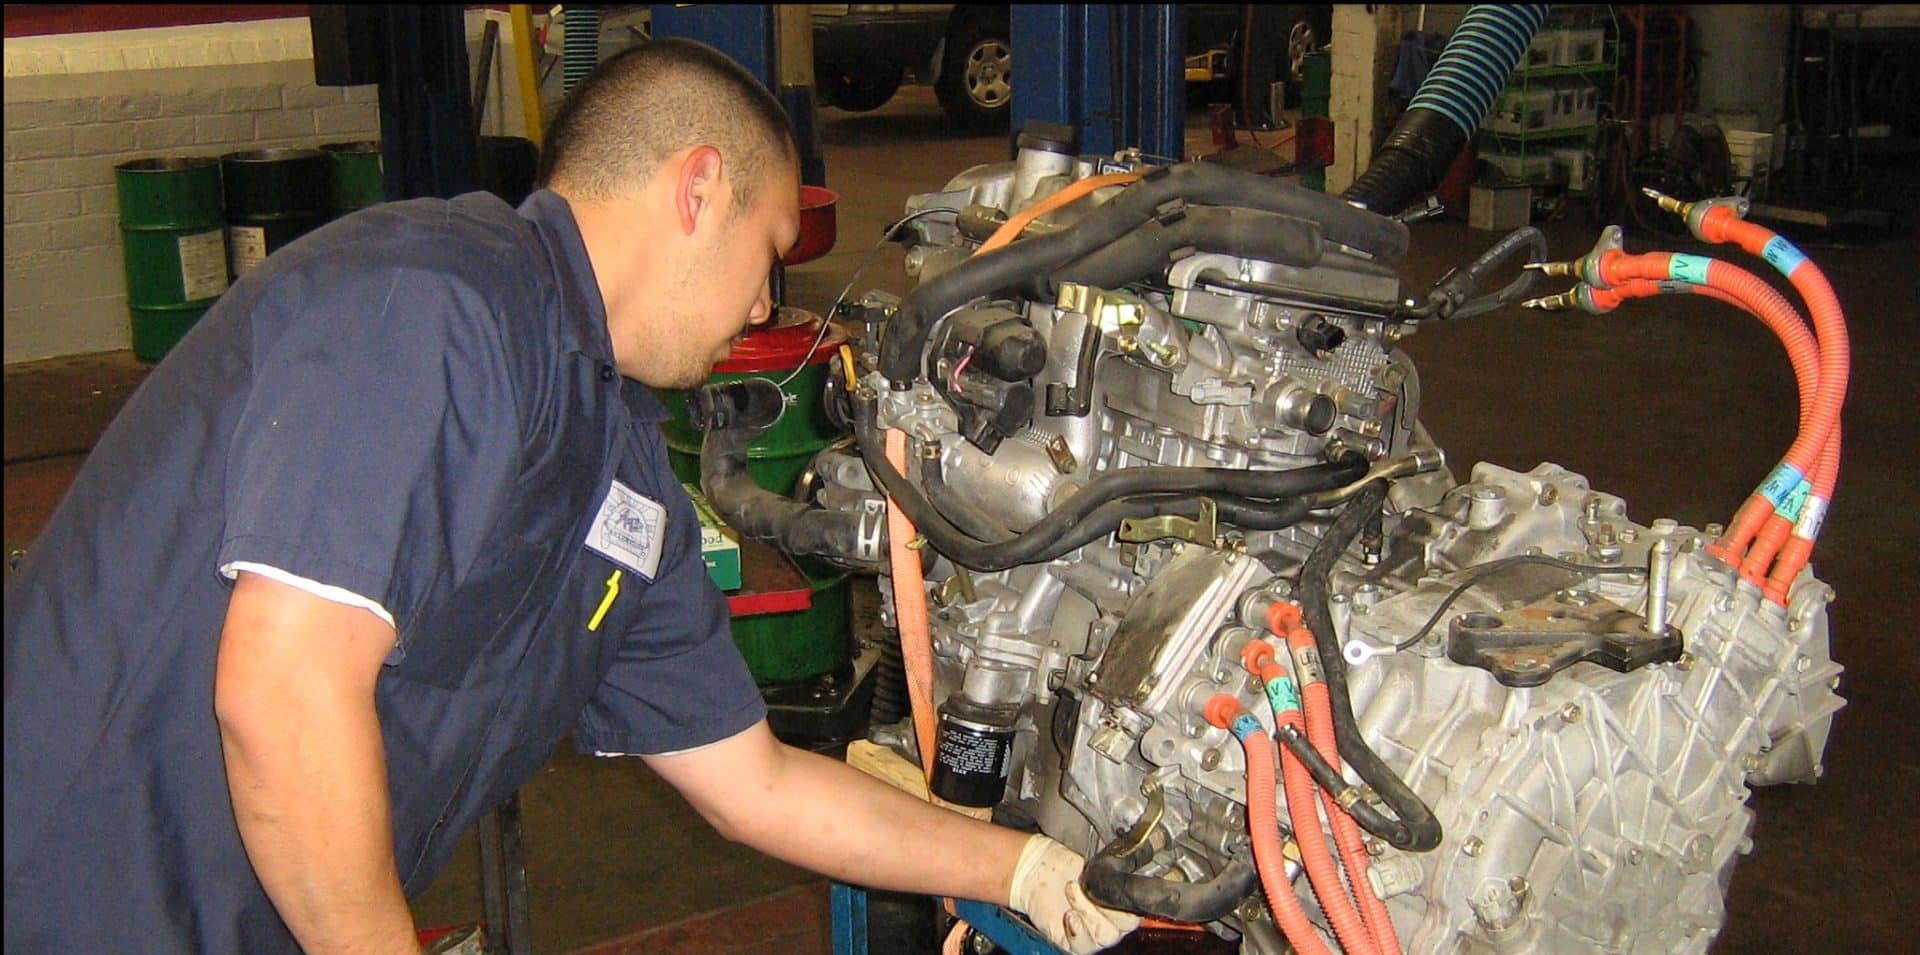 An old picture of Scott repairing an old Prius back in the early 2000s